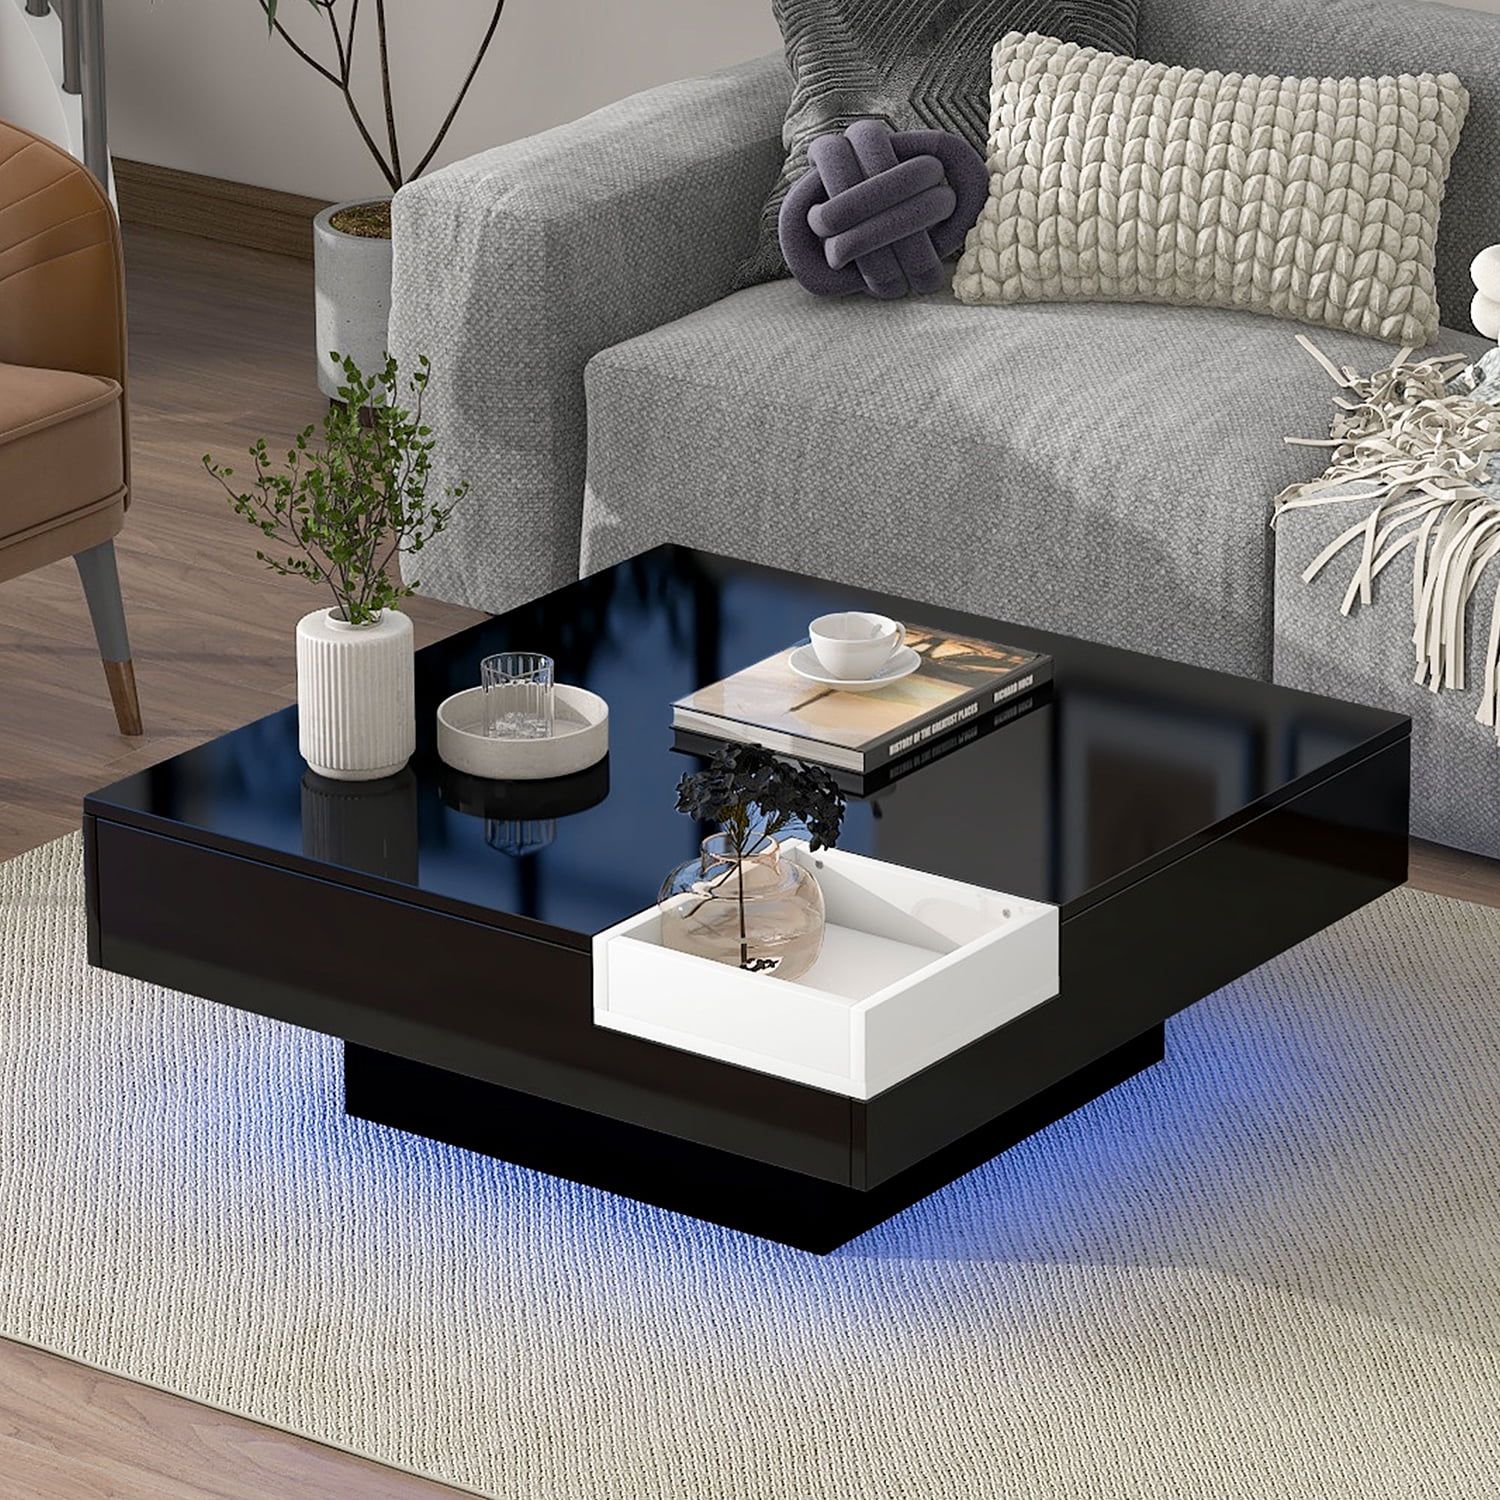 Churanty Square Led Light Coffee Table, Modern Cocktail Table With Detachable  Tray And Remote Control For Living Room, Black – Walmart Pertaining To Detachable Tray Coffee Tables (Photo 1 of 15)